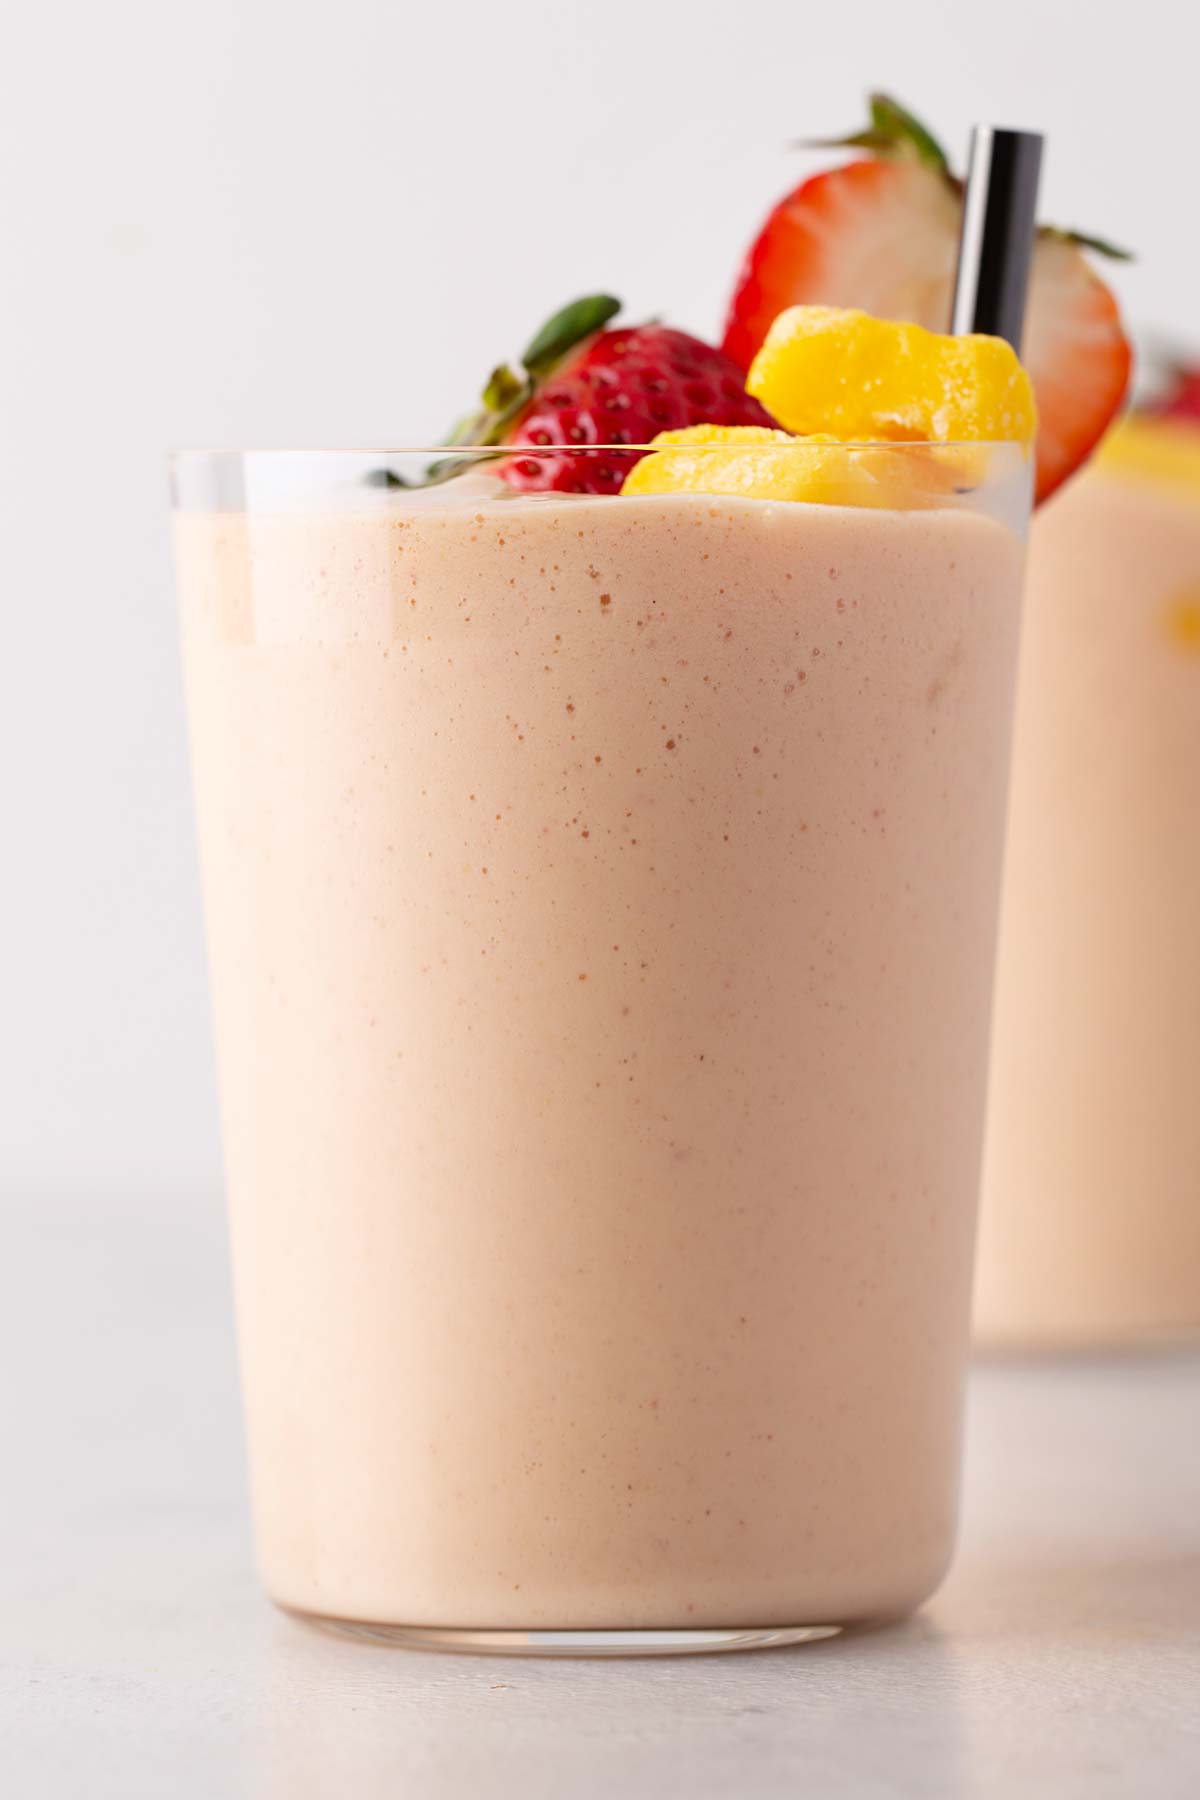 Strawberry mango smoothie in a cup.